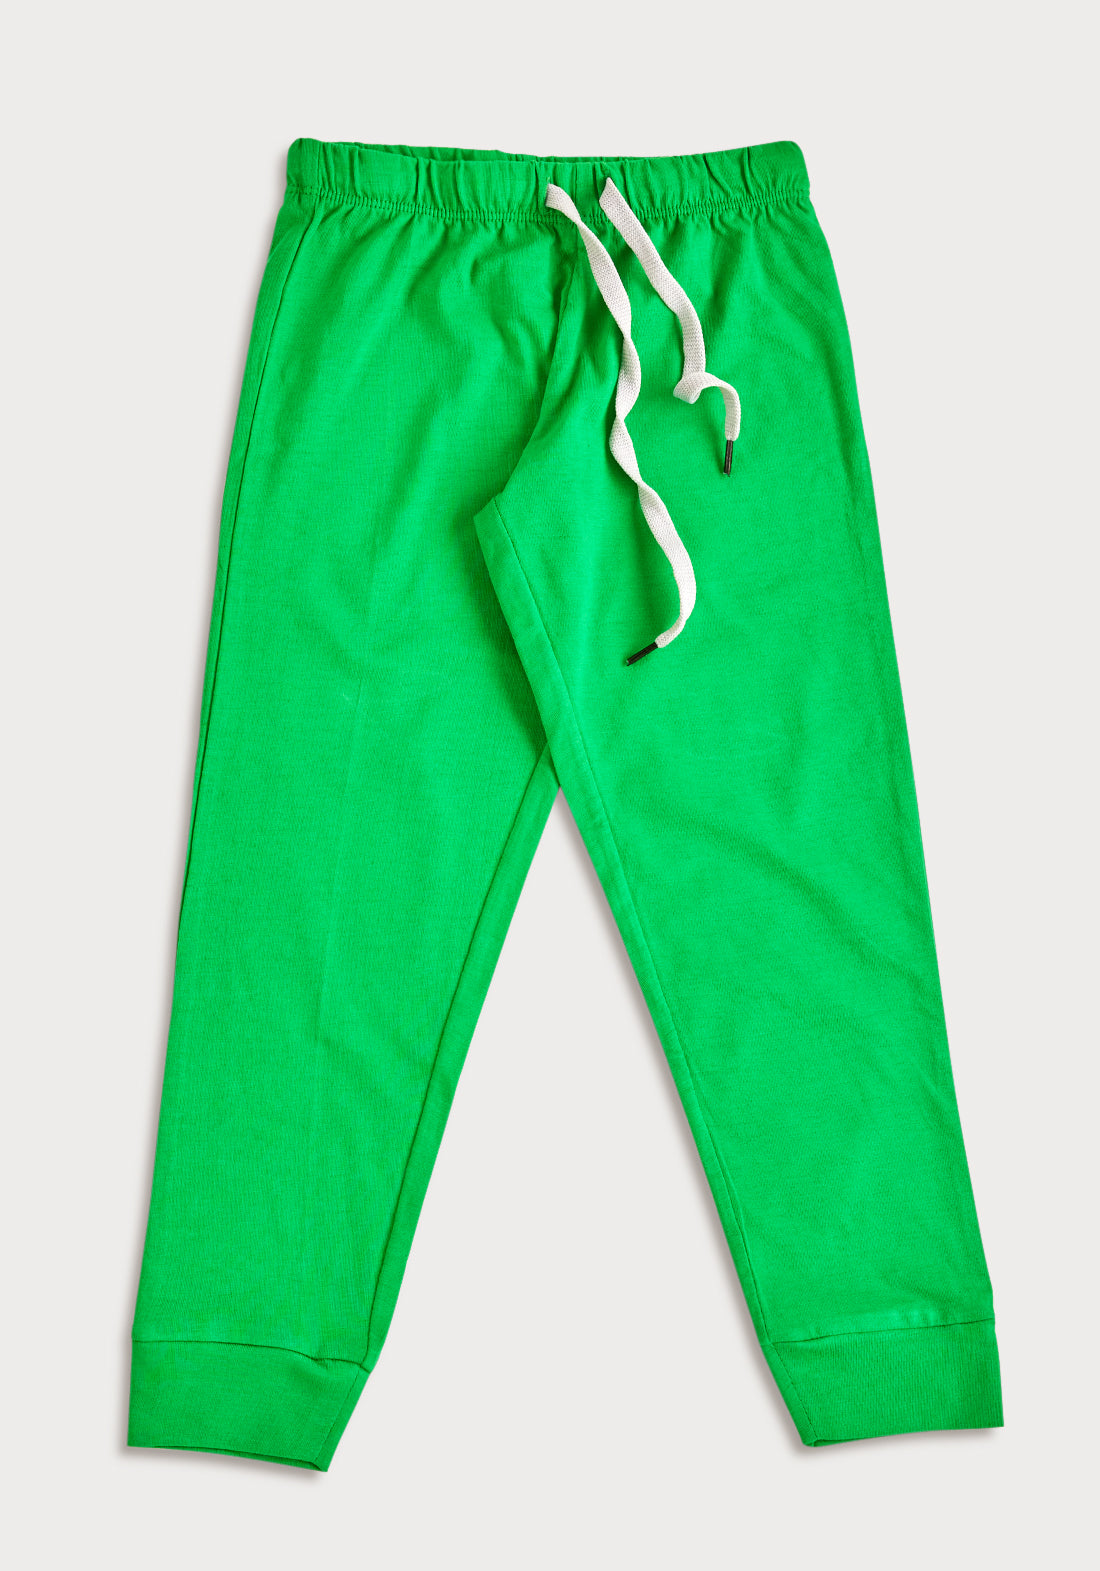 GREEN AND BLUE ZEBRA PRINT KNITTED PANTS